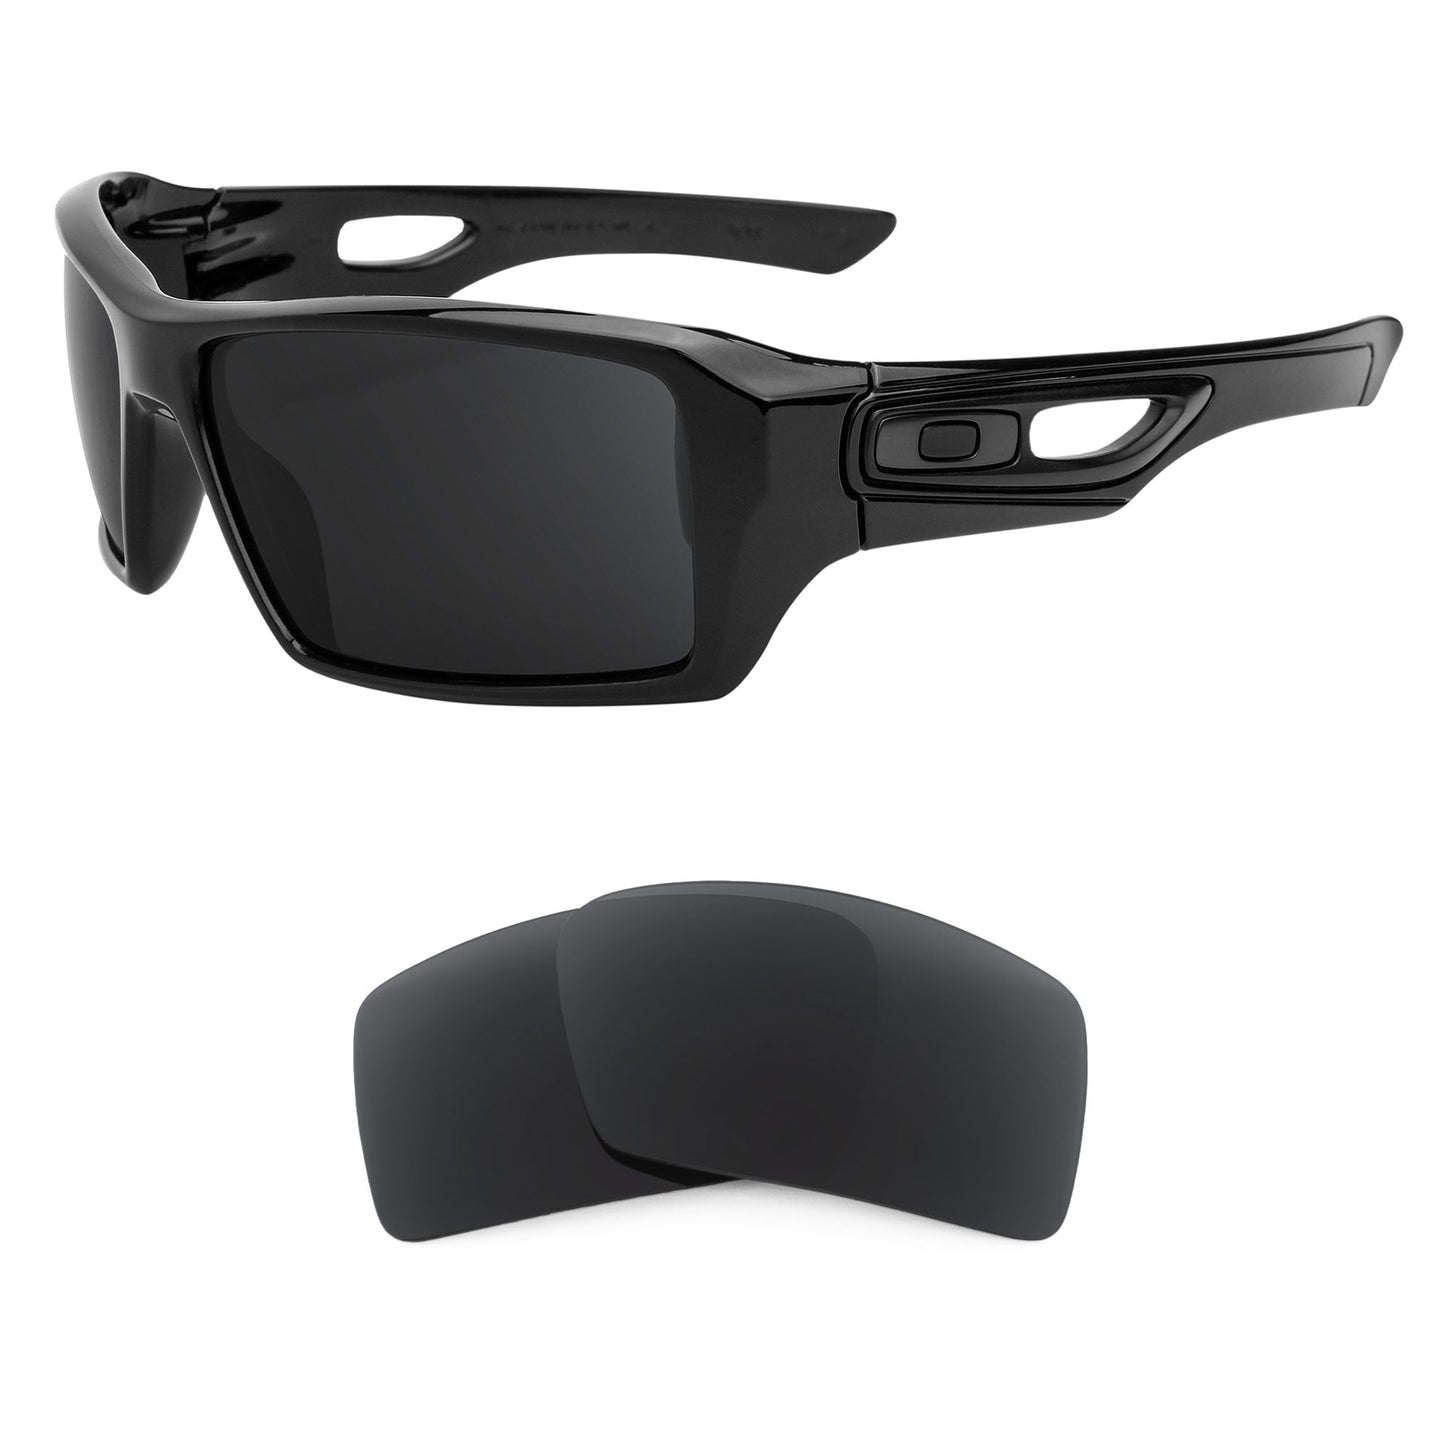 Oakley Eyepatch 2 sunglasses with replacement lenses